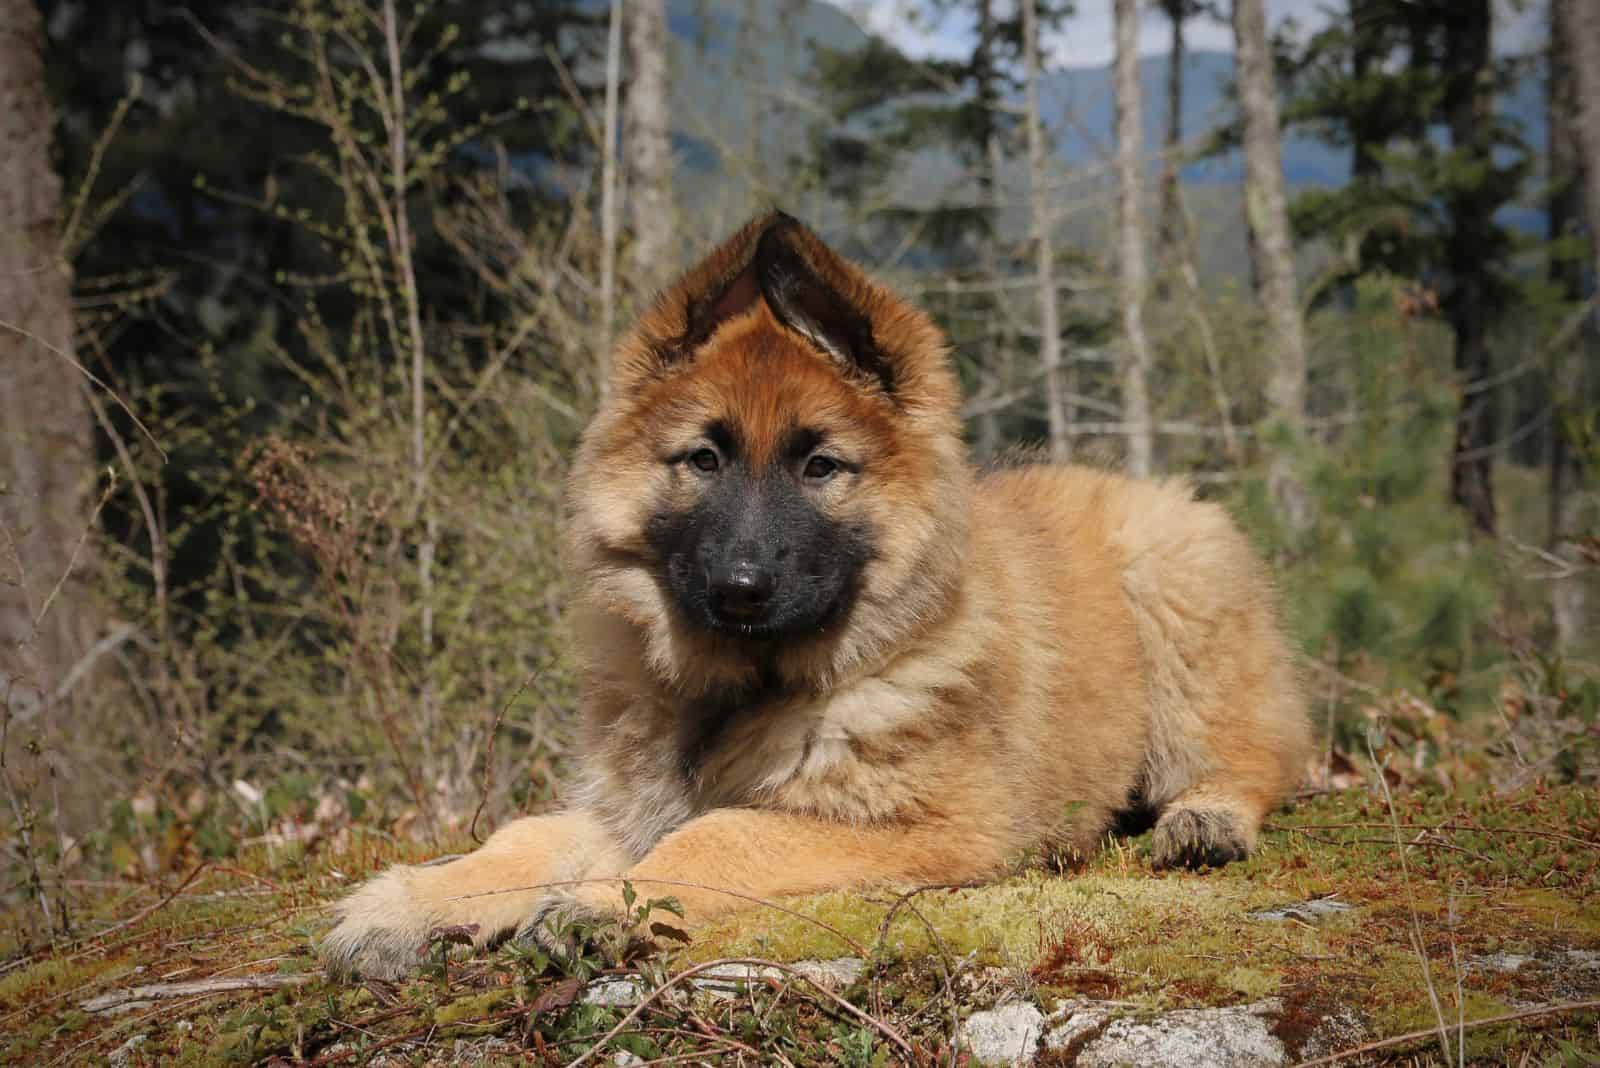 Shiloh Shepherds lies in the woods